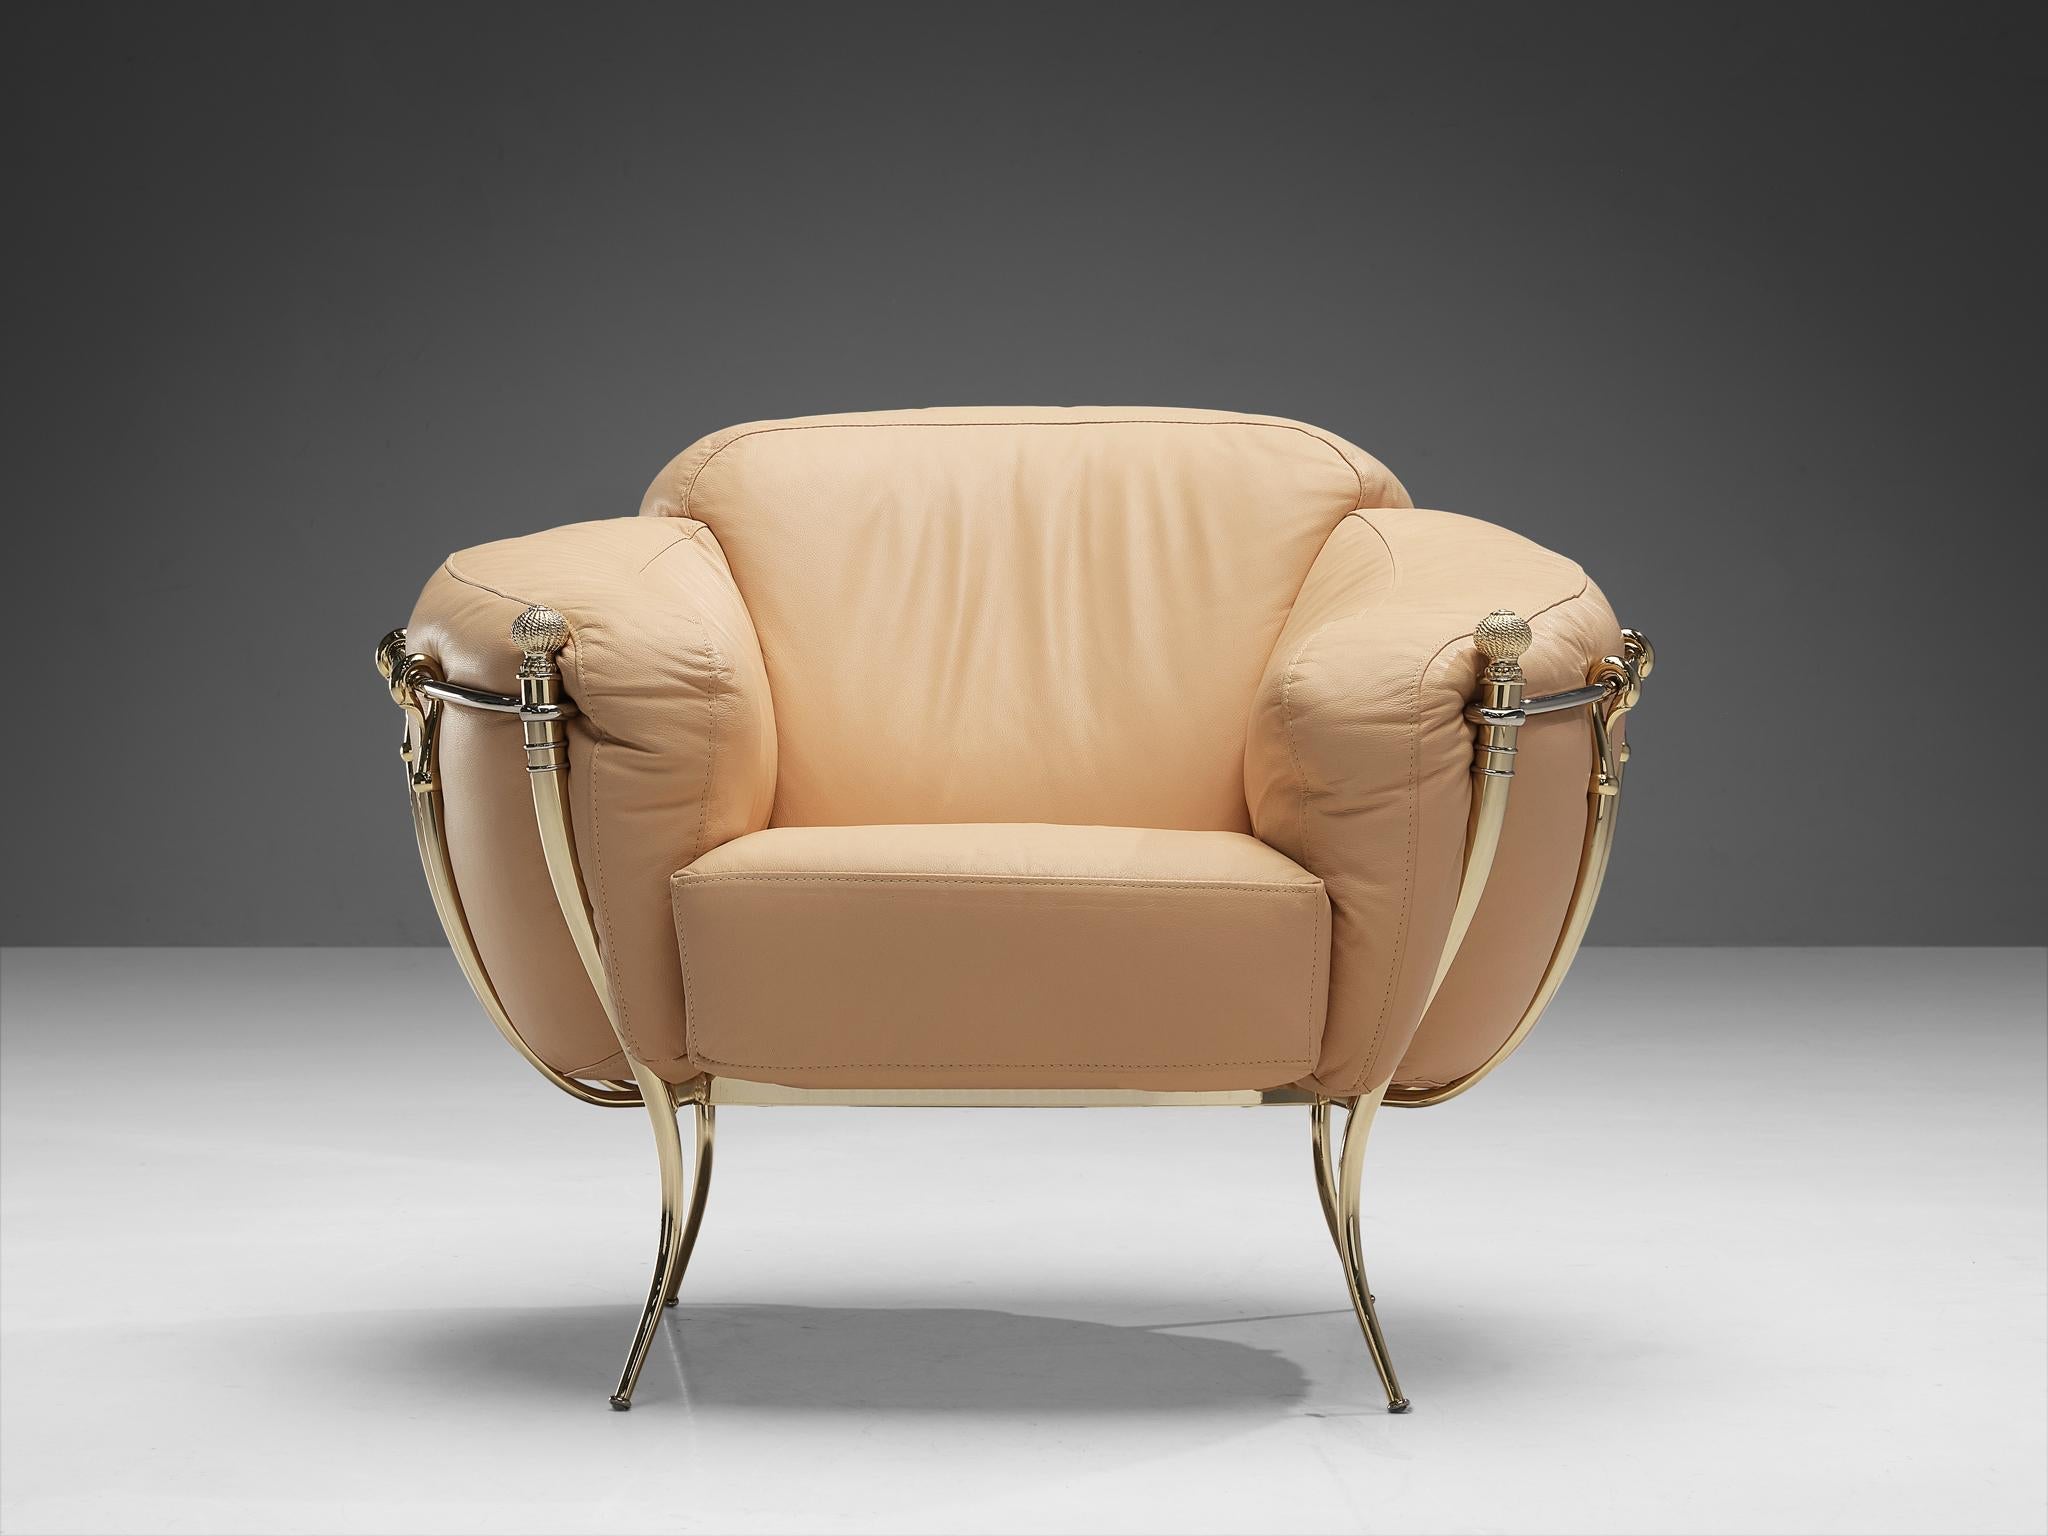 Spanish Lounge Chair in Peach Leather and Brass